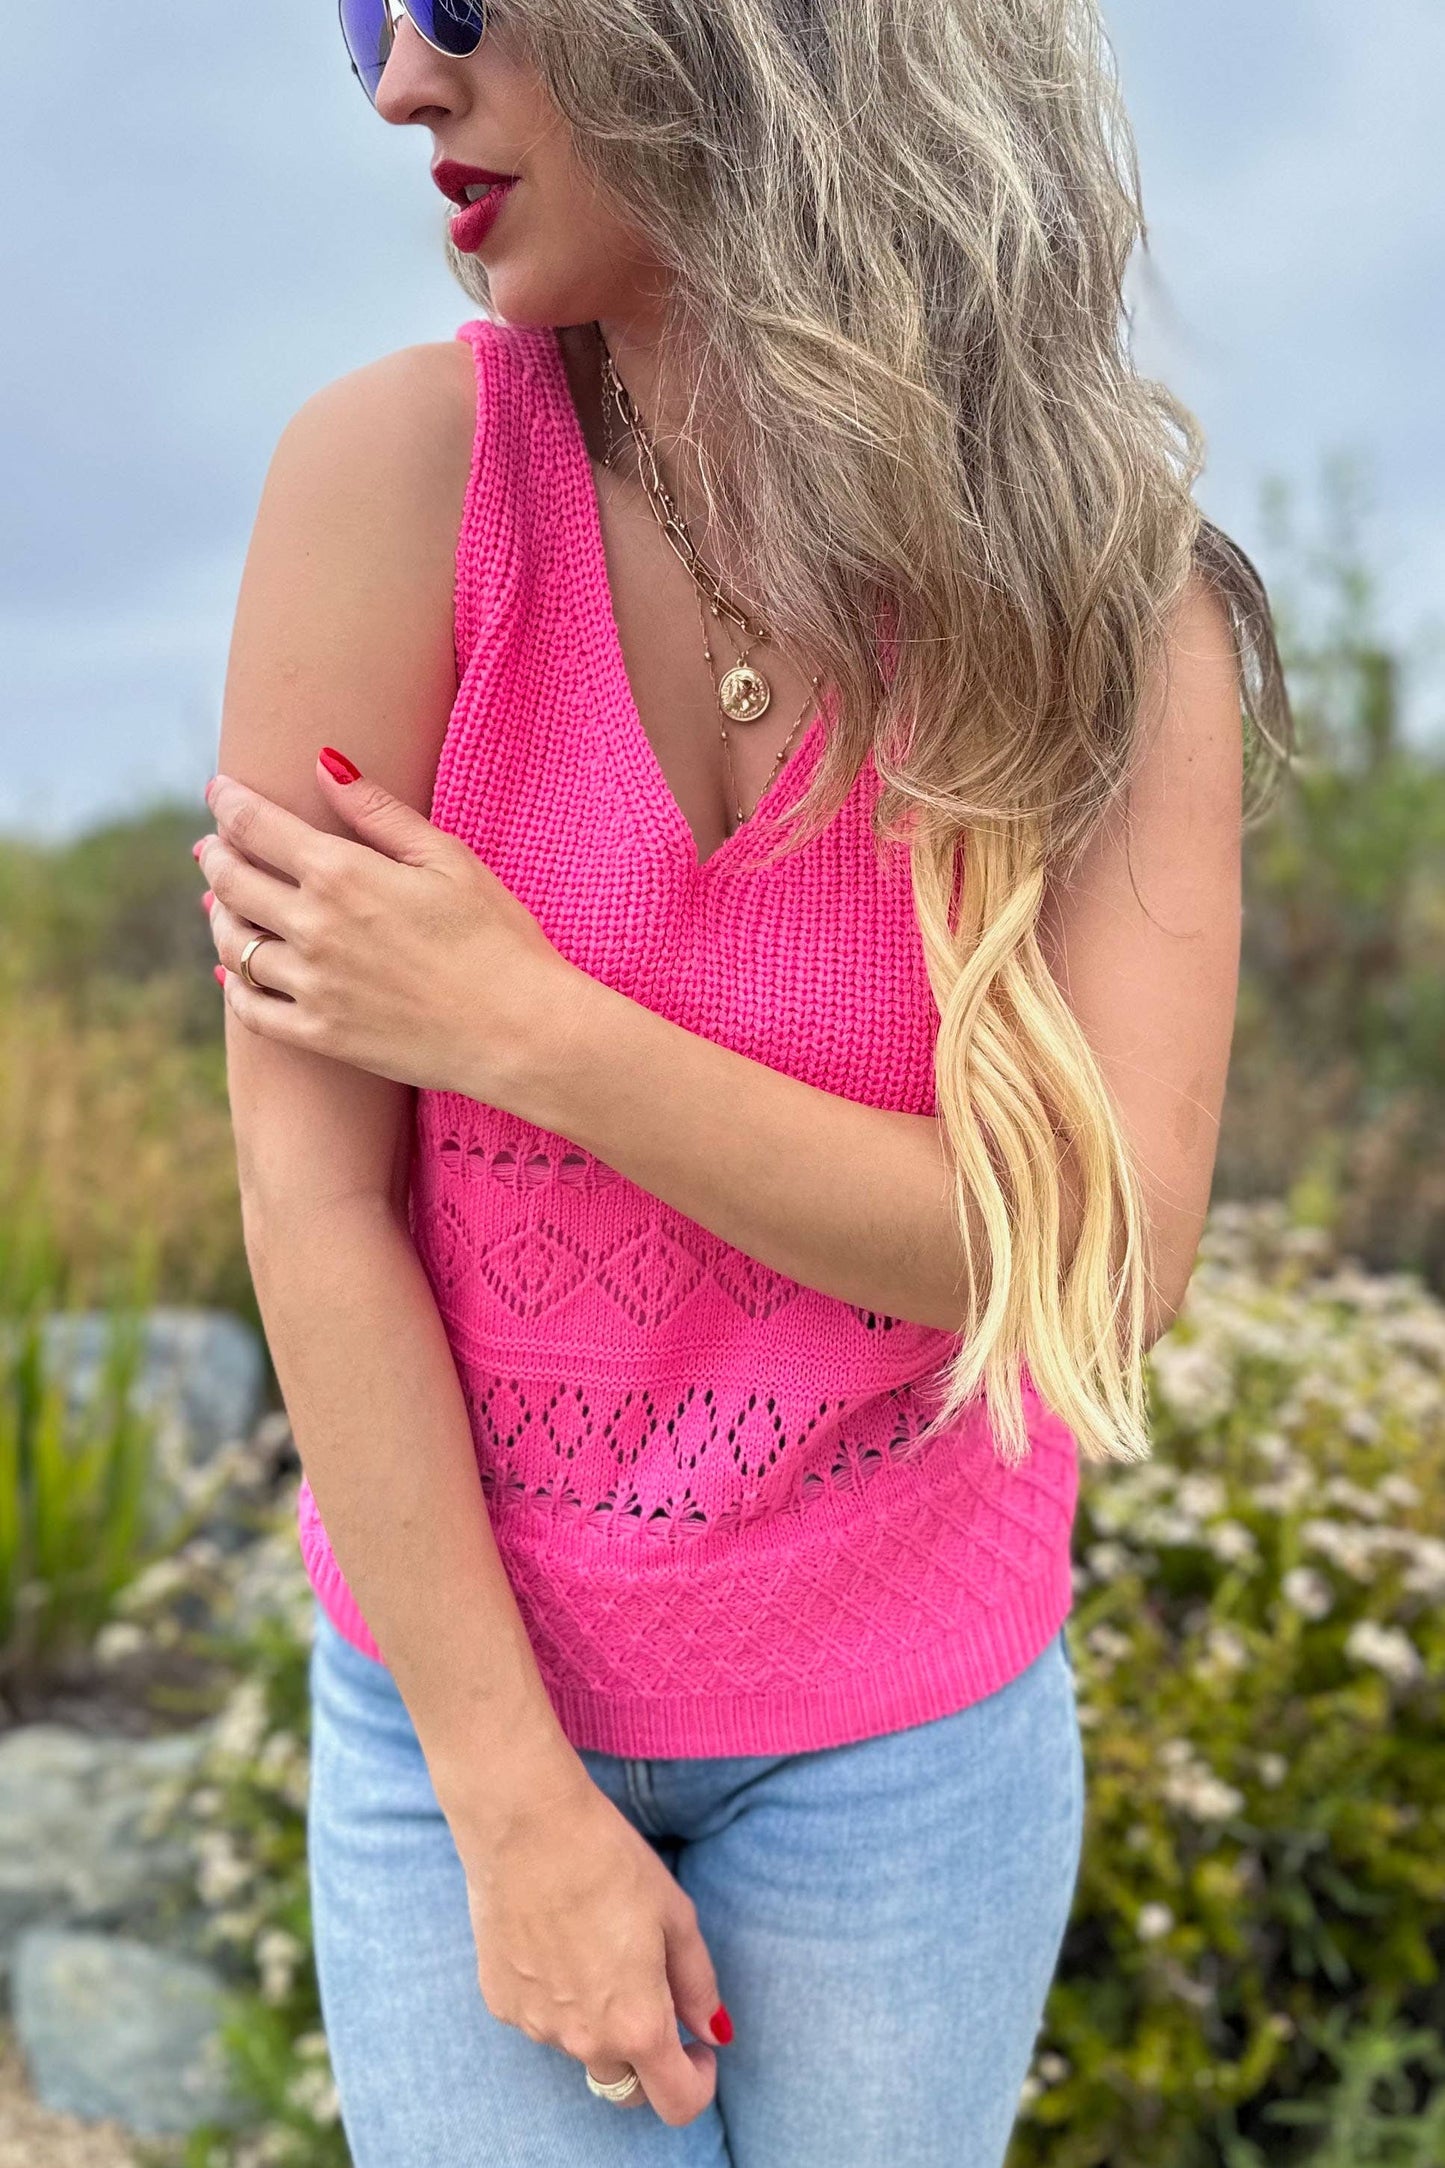 AMOLI - Neon Pink Textured Knit V Neck Sweater Tank Top: S/M / Neon Pink $45